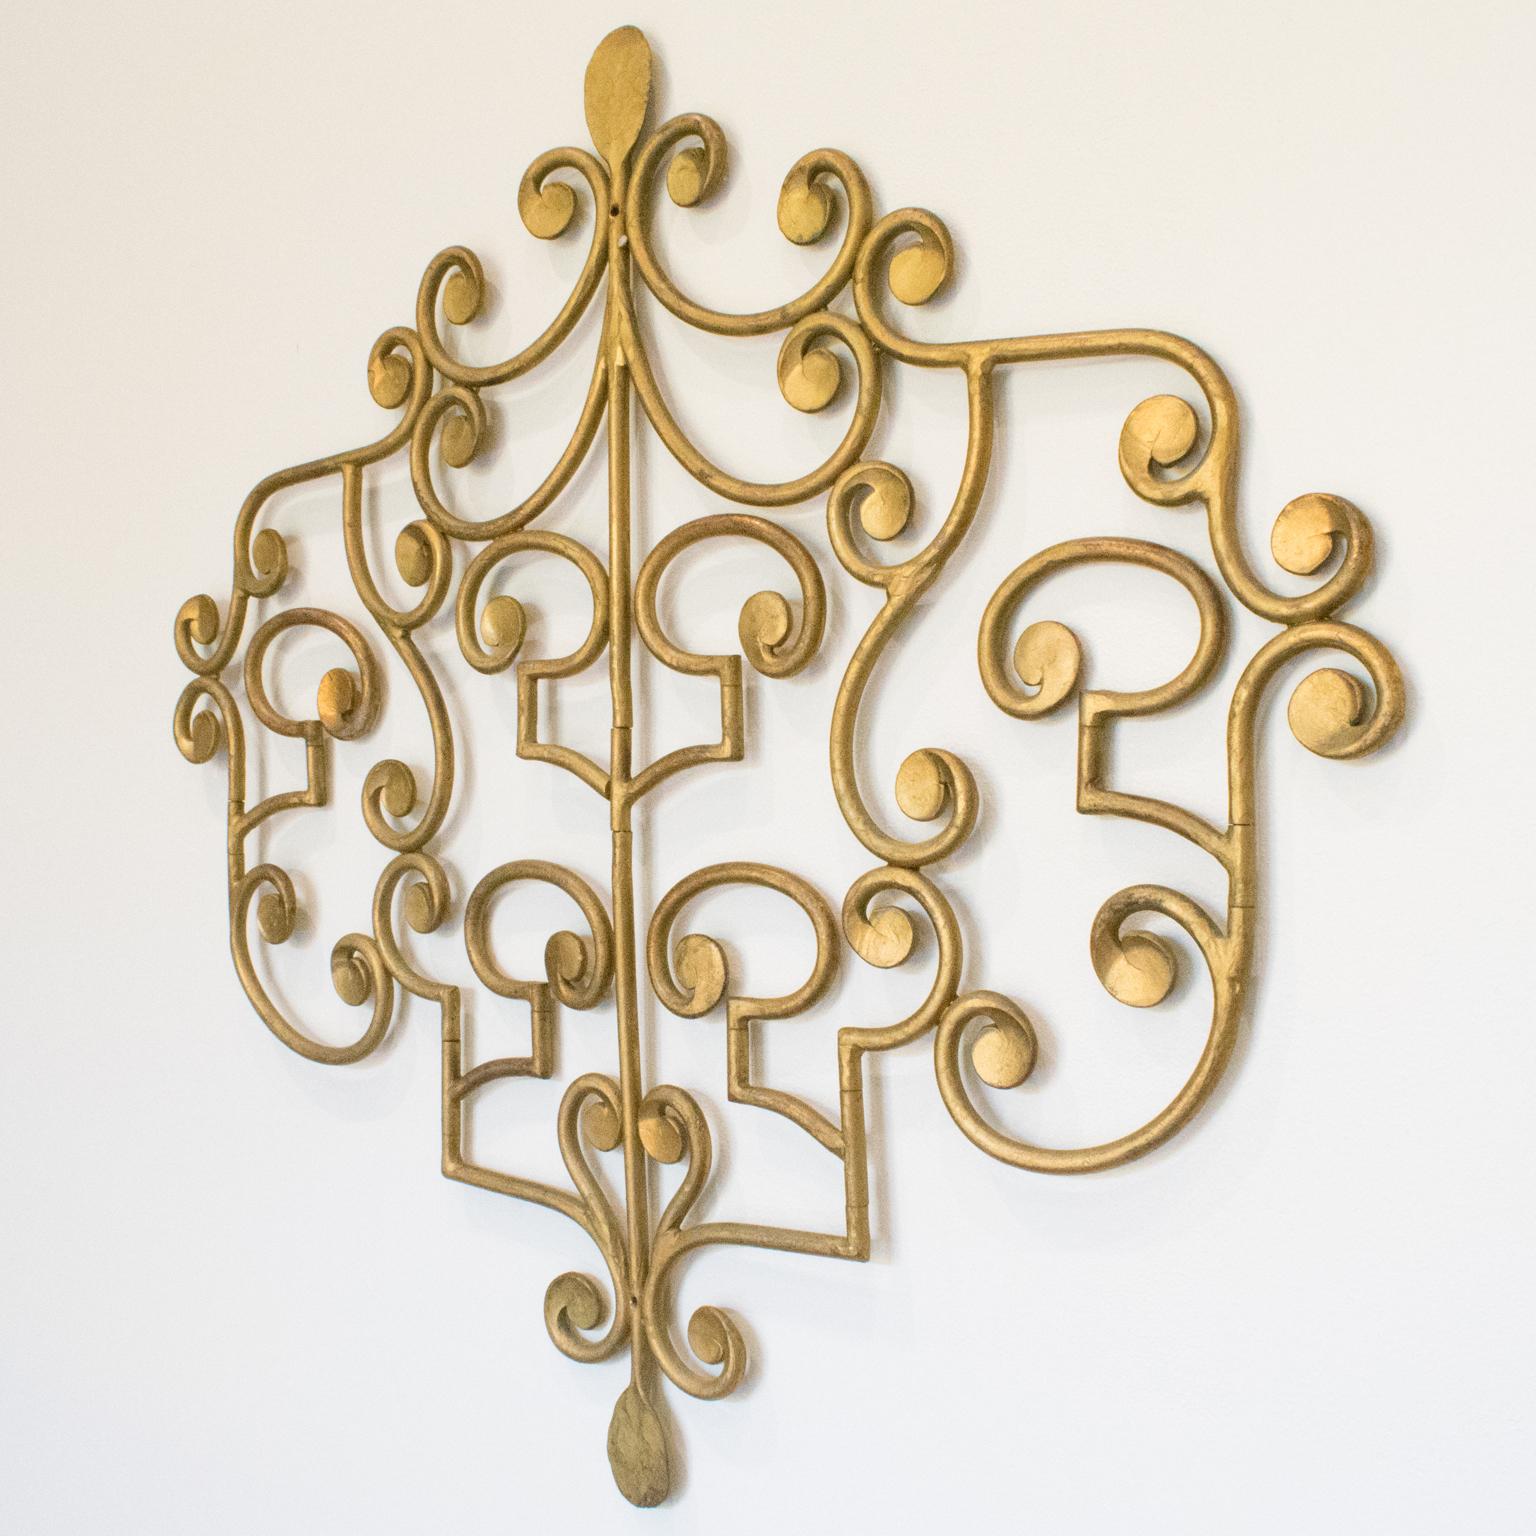 20th Century French Wall Mounted Ornament Gilt Metal Coat Rack Hanger